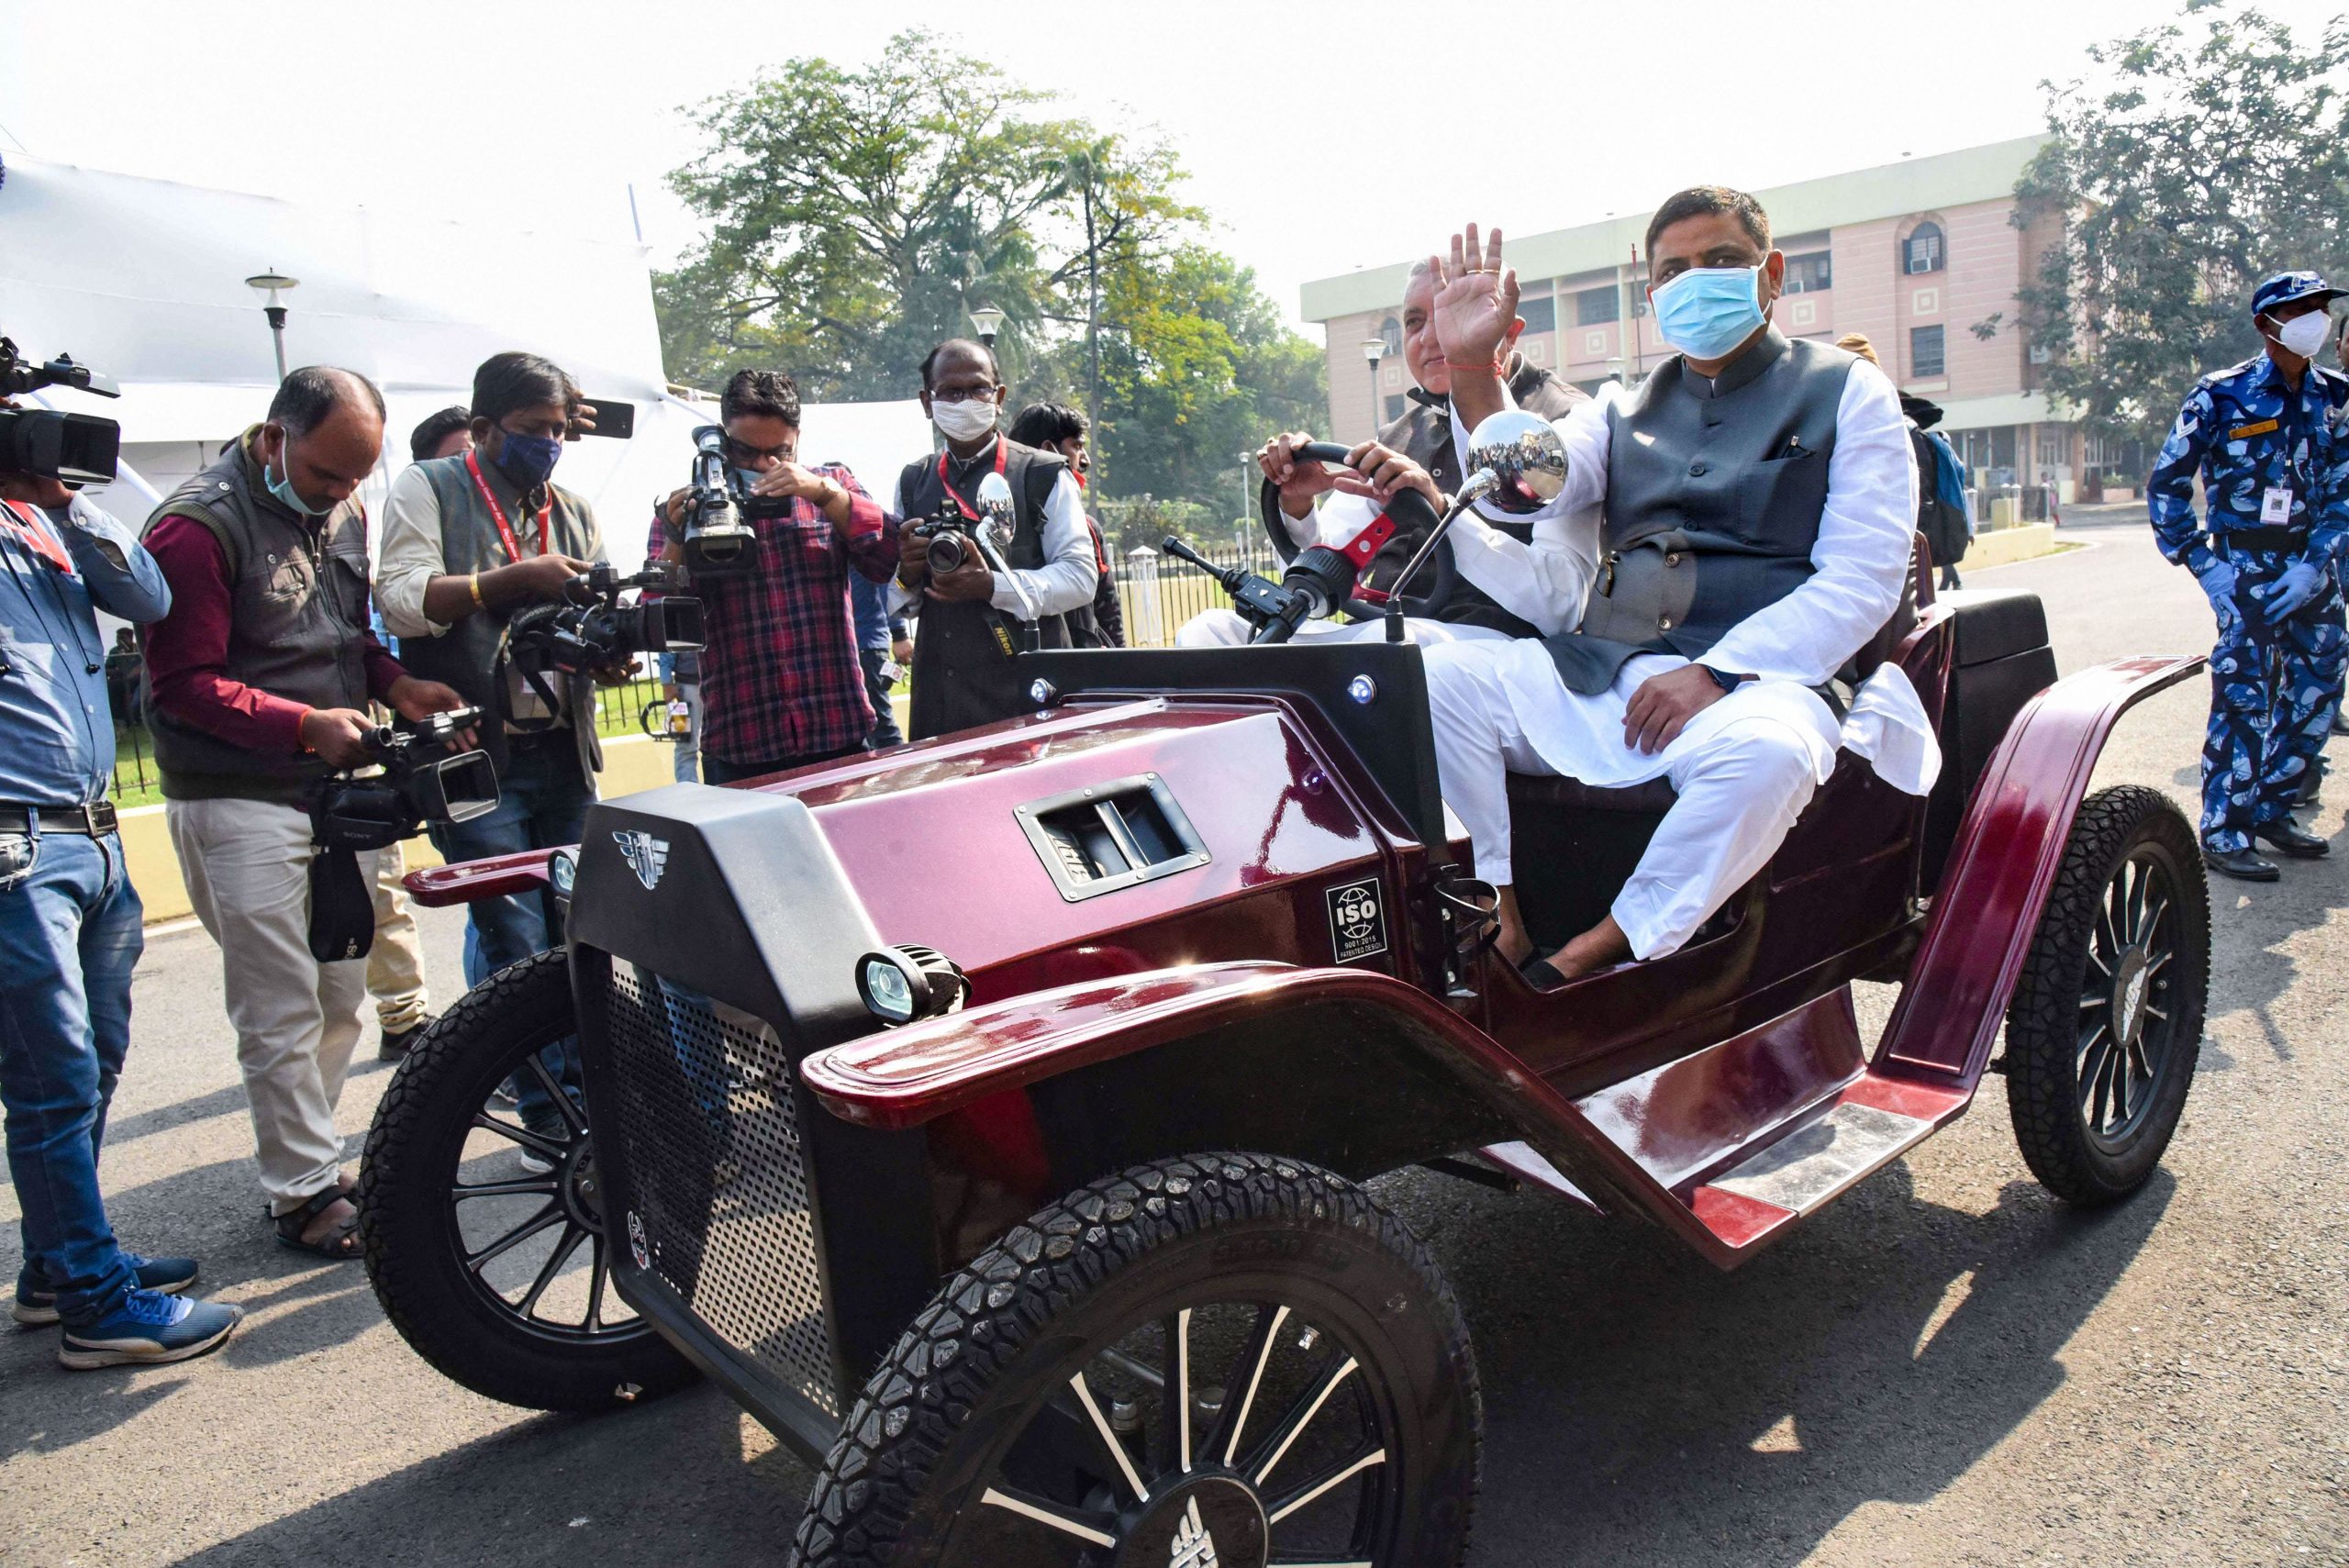 Bihar MLCs arrive in a vintage car on first day of Assembly session | Watch